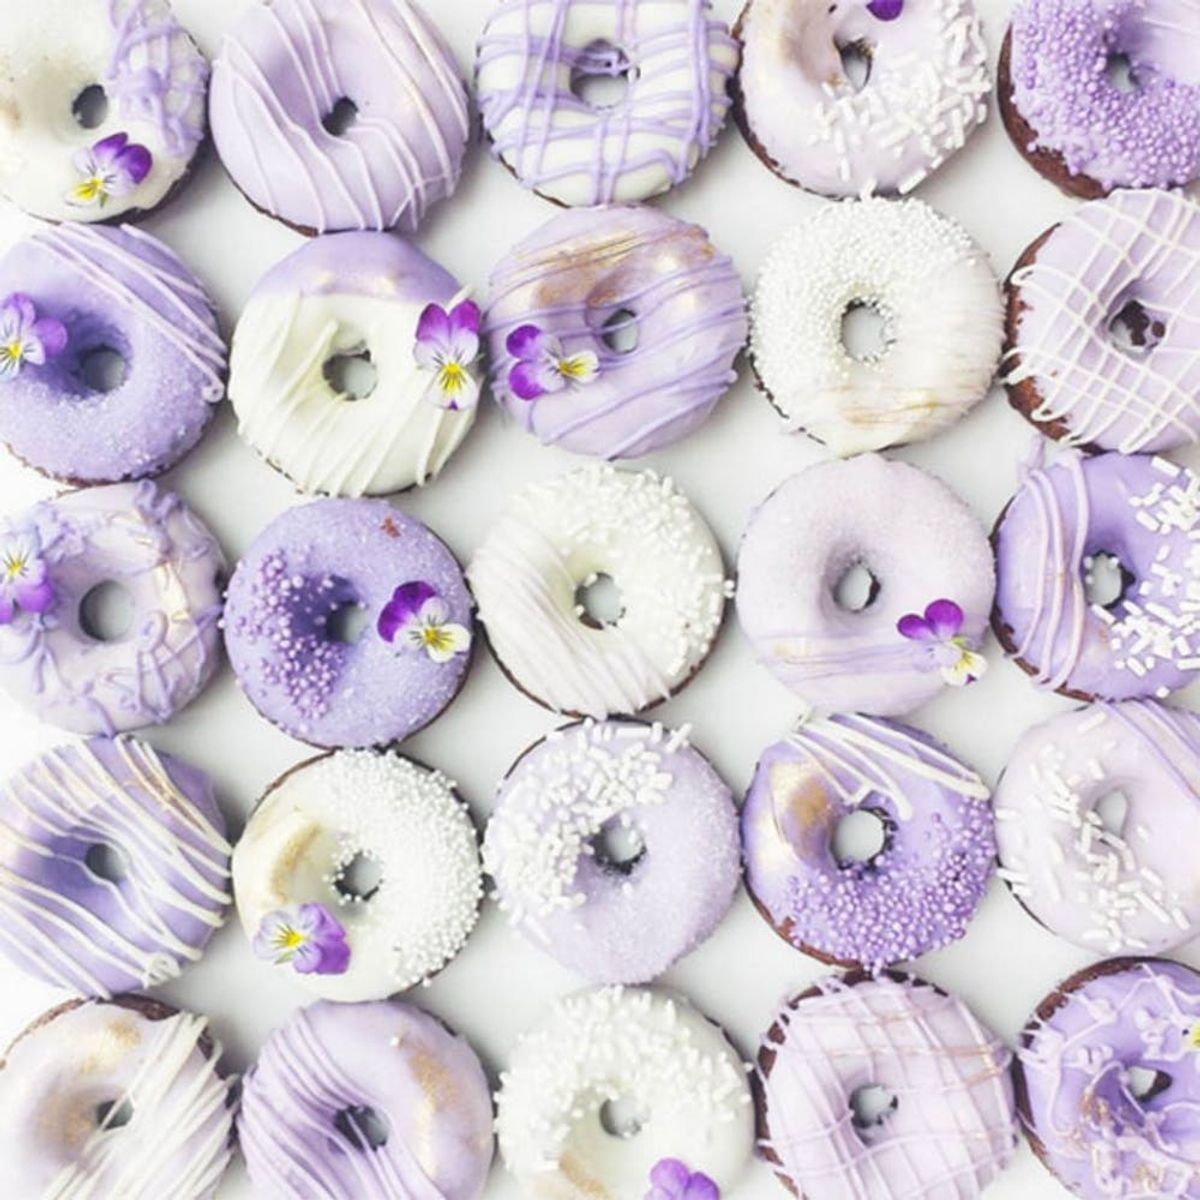 How to Make Ombre Donuts That Are Insanely Instagram-able